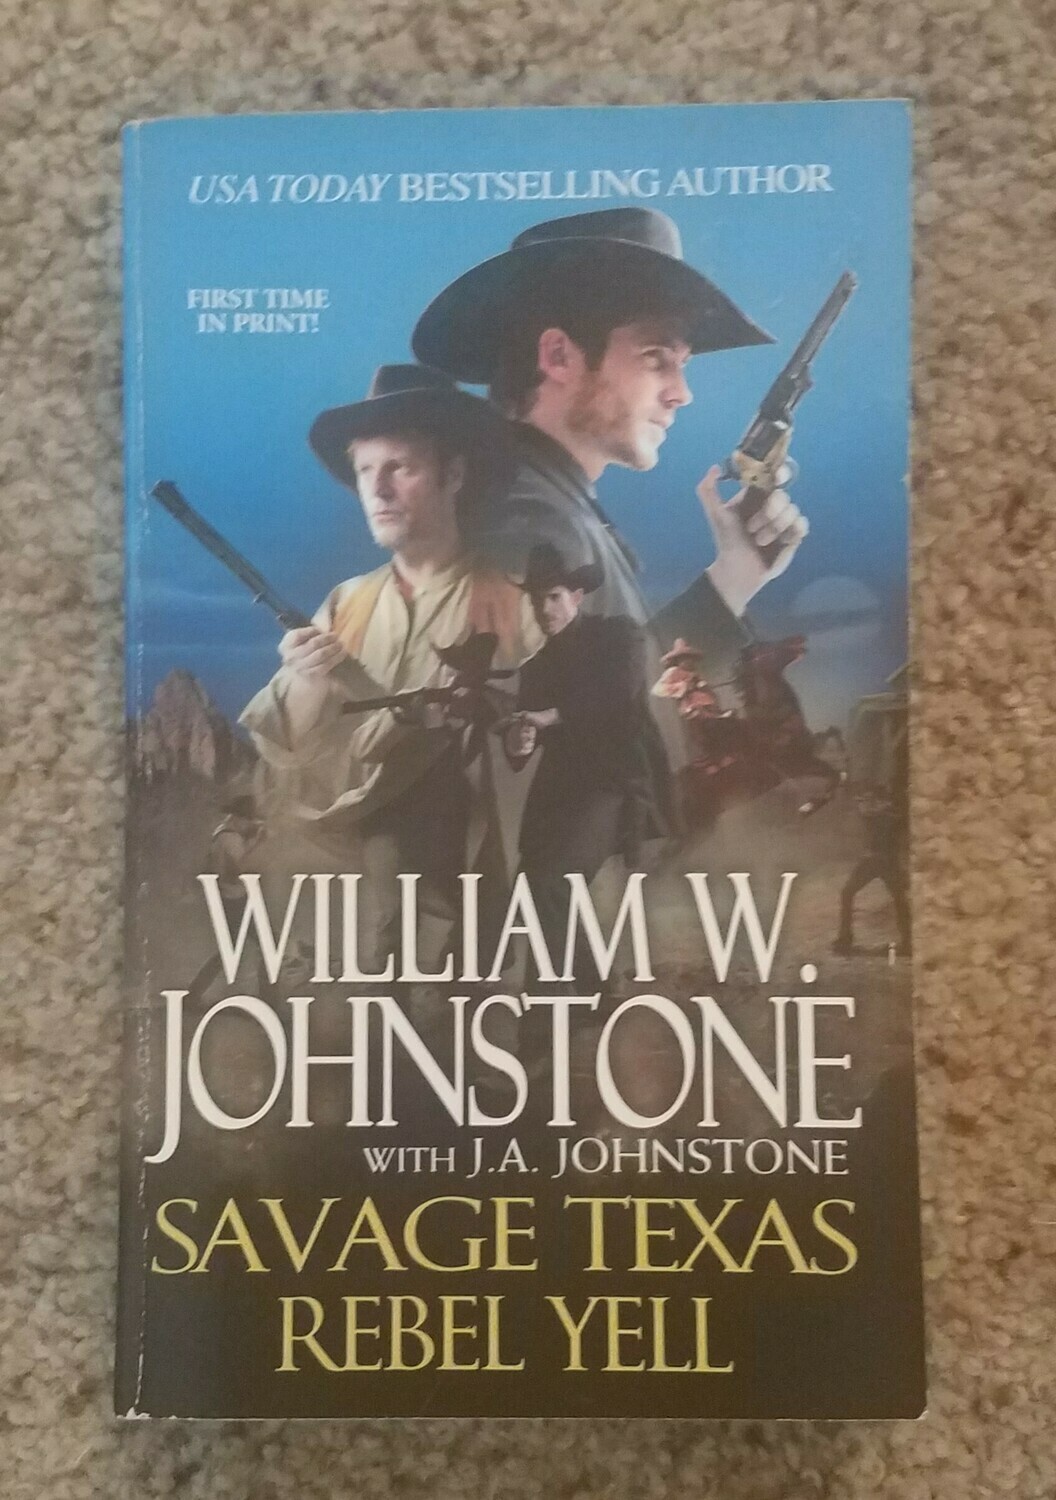 Savage Texas: Rebel Yell by William W. Johnstone with J.A. Johnstone